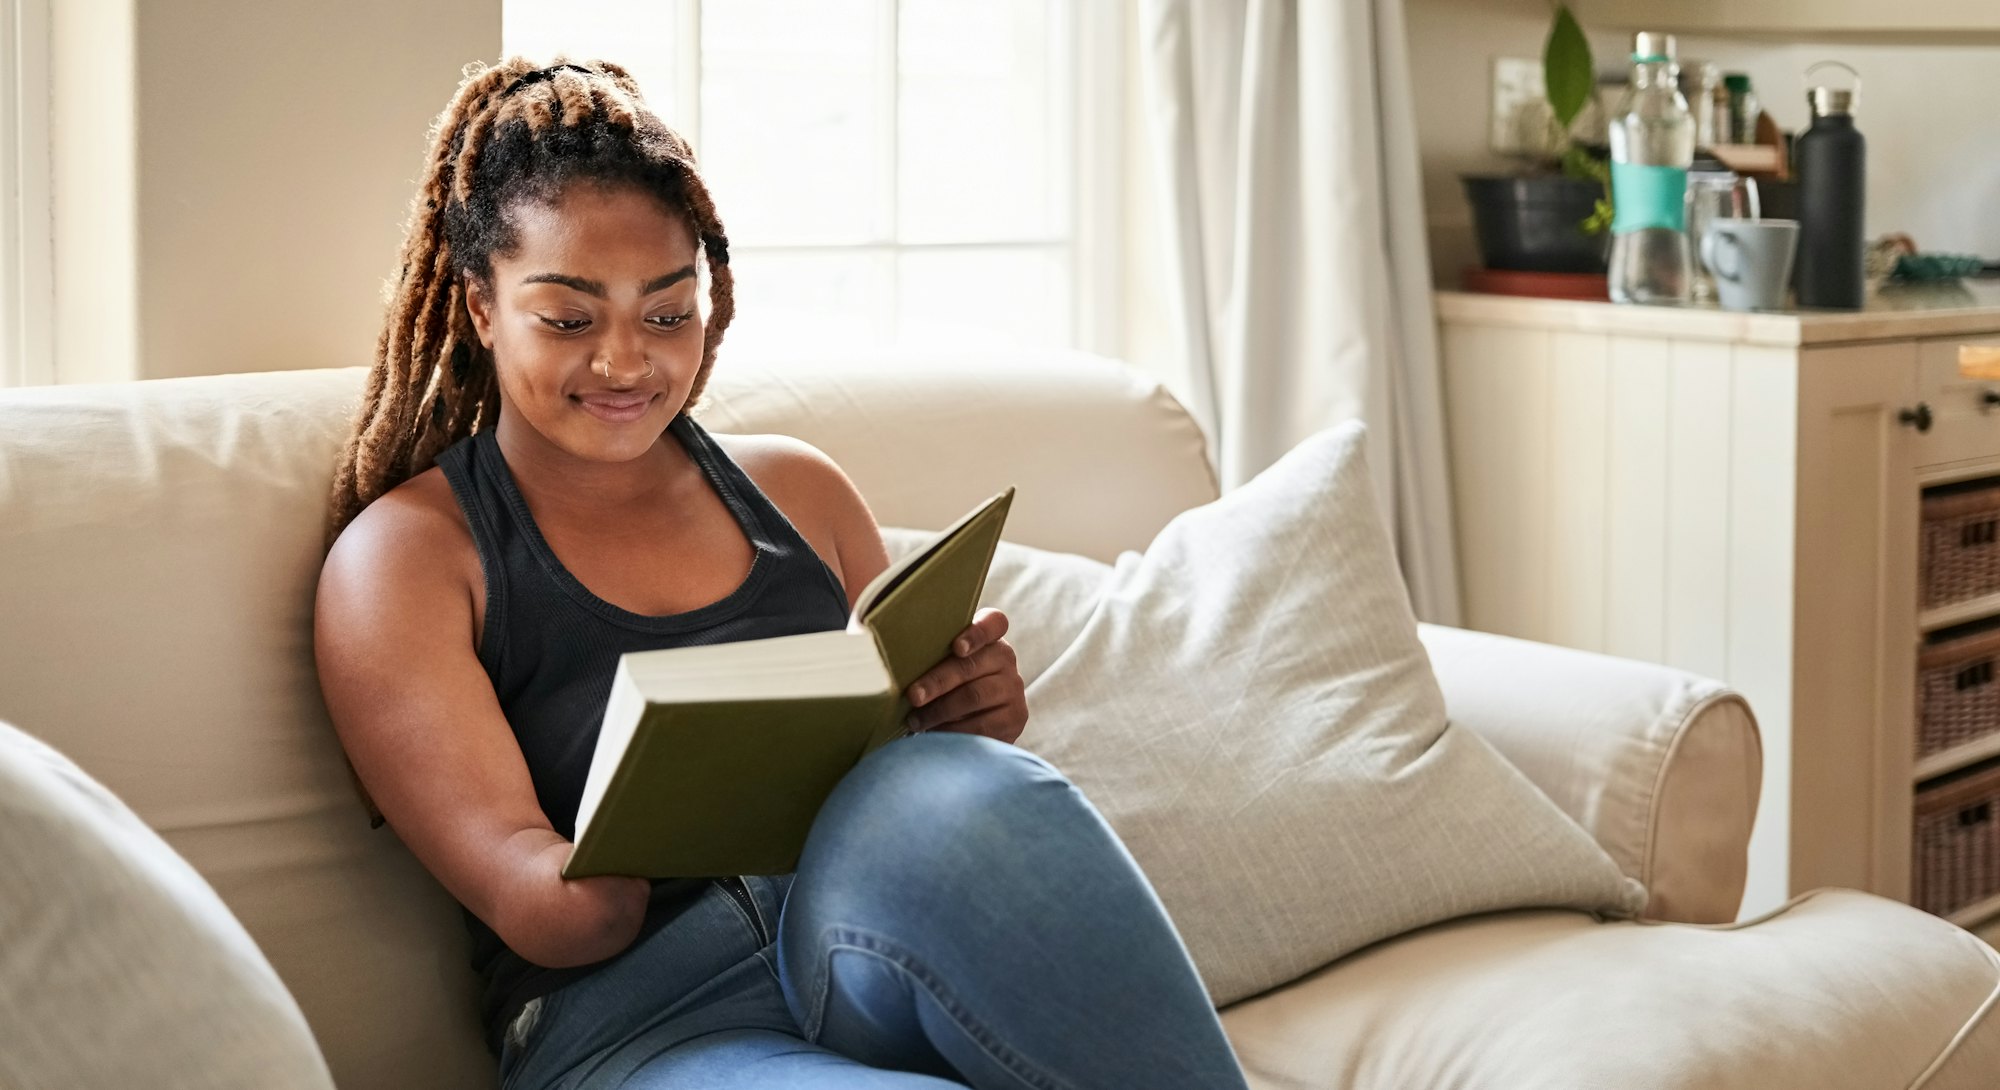 Young African woman reading a book while sitting on living room sofa at home, woman missing lower ha...